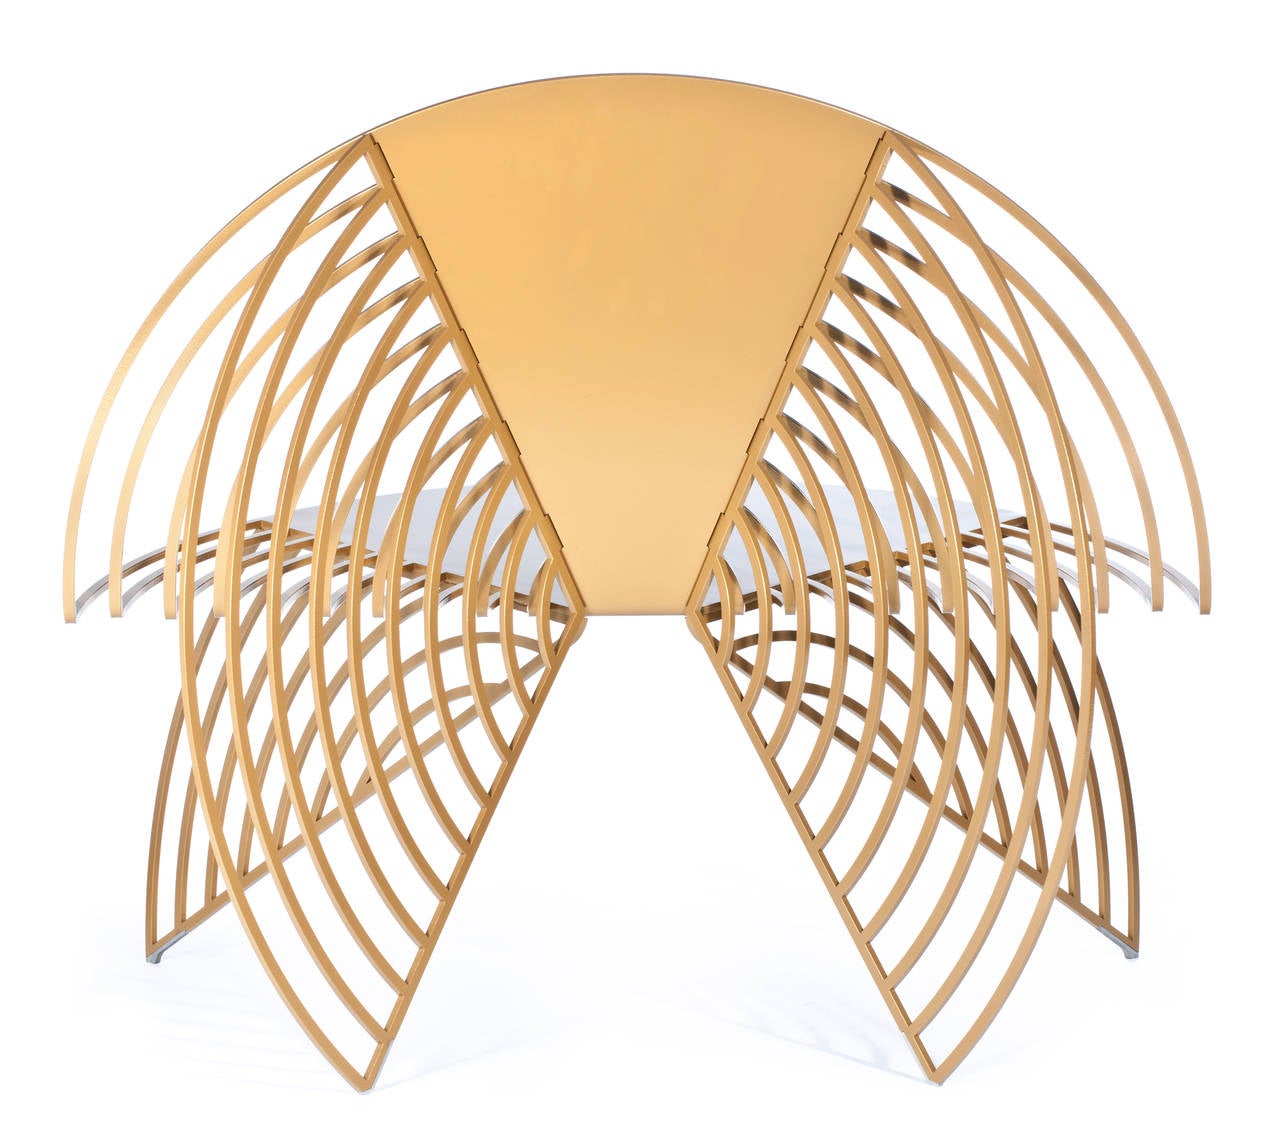 American Golden Wings of Steel Chair, Designed by Laurie Beckerman in 2012 For Sale